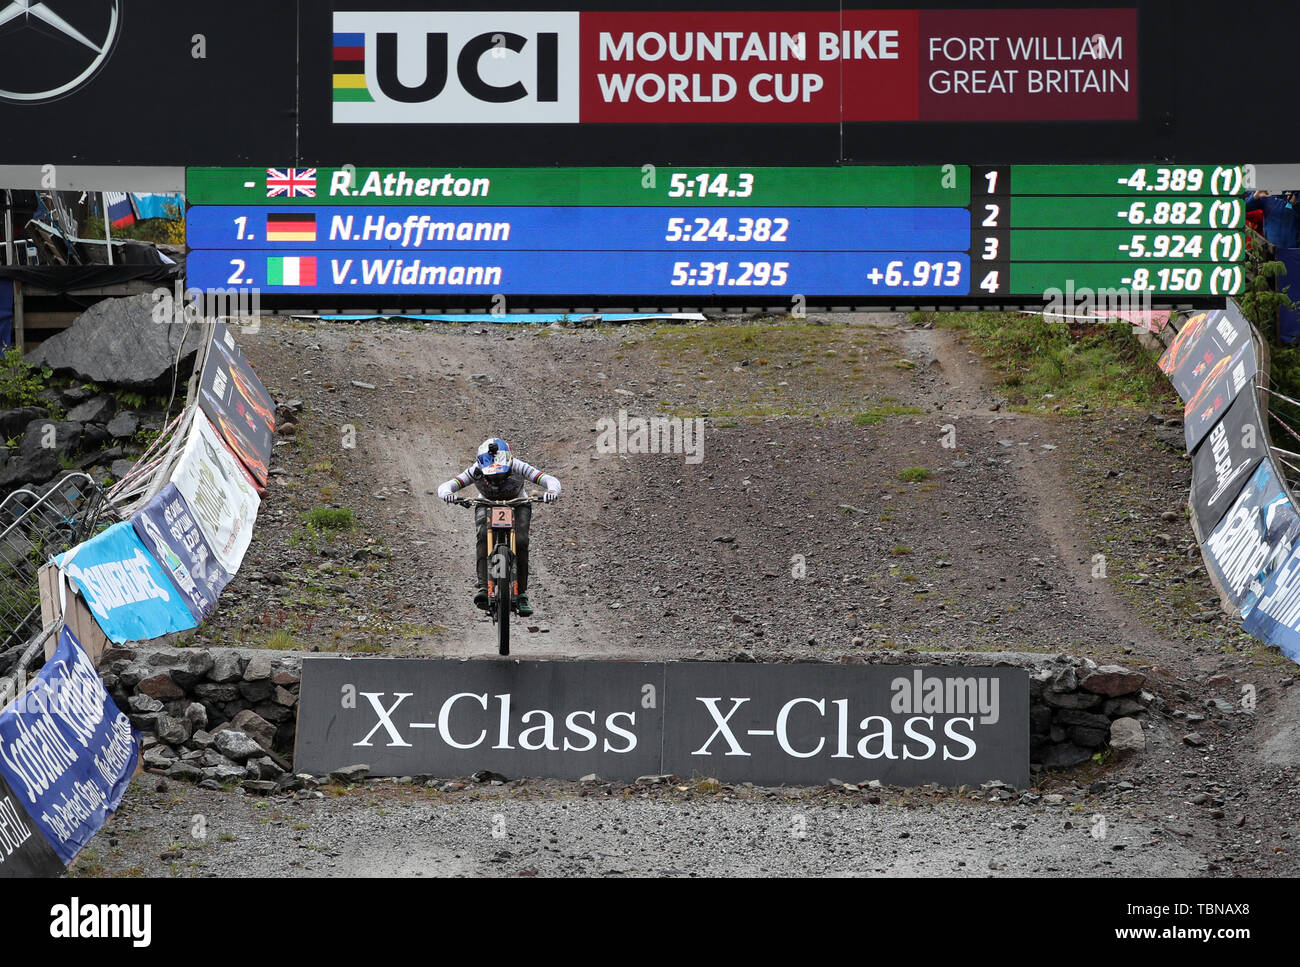 Great Britain's Rachel Atherton crosses the finish line to win the Women's Downhill during the UCI Mountain Bike World Cup at Fort William. Stock Photo